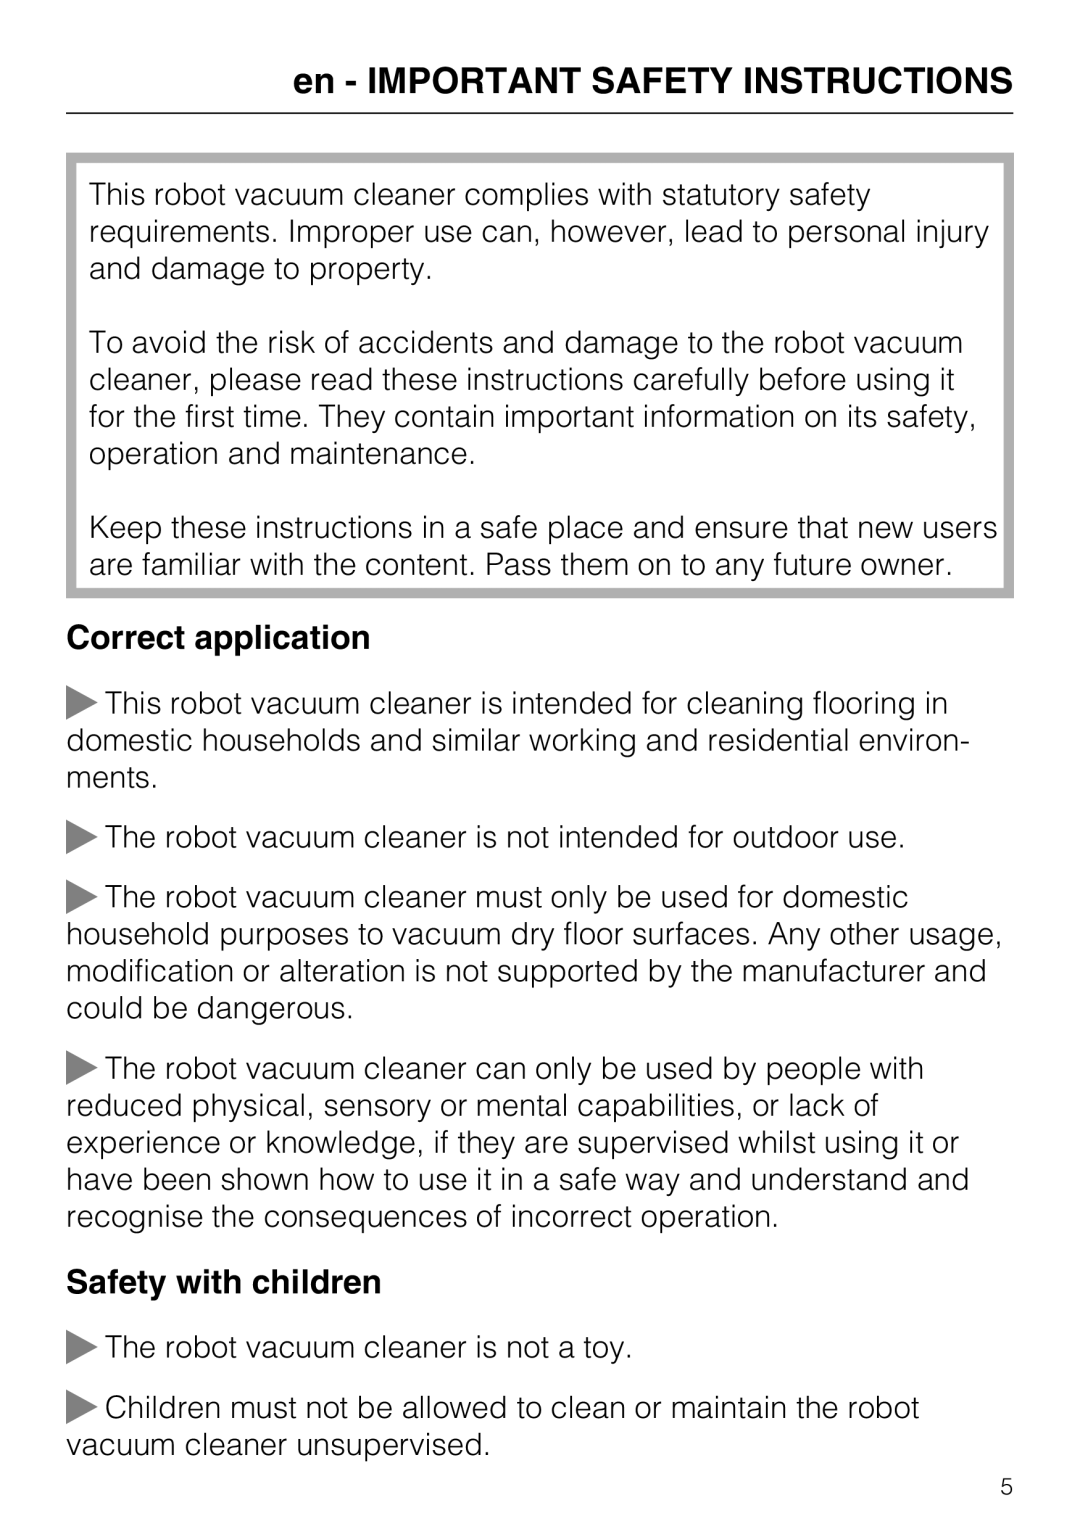 Miele HS17 manual en - IMPORTANT SAFETY INSTRUCTIONS, Correct application, Safety with children 